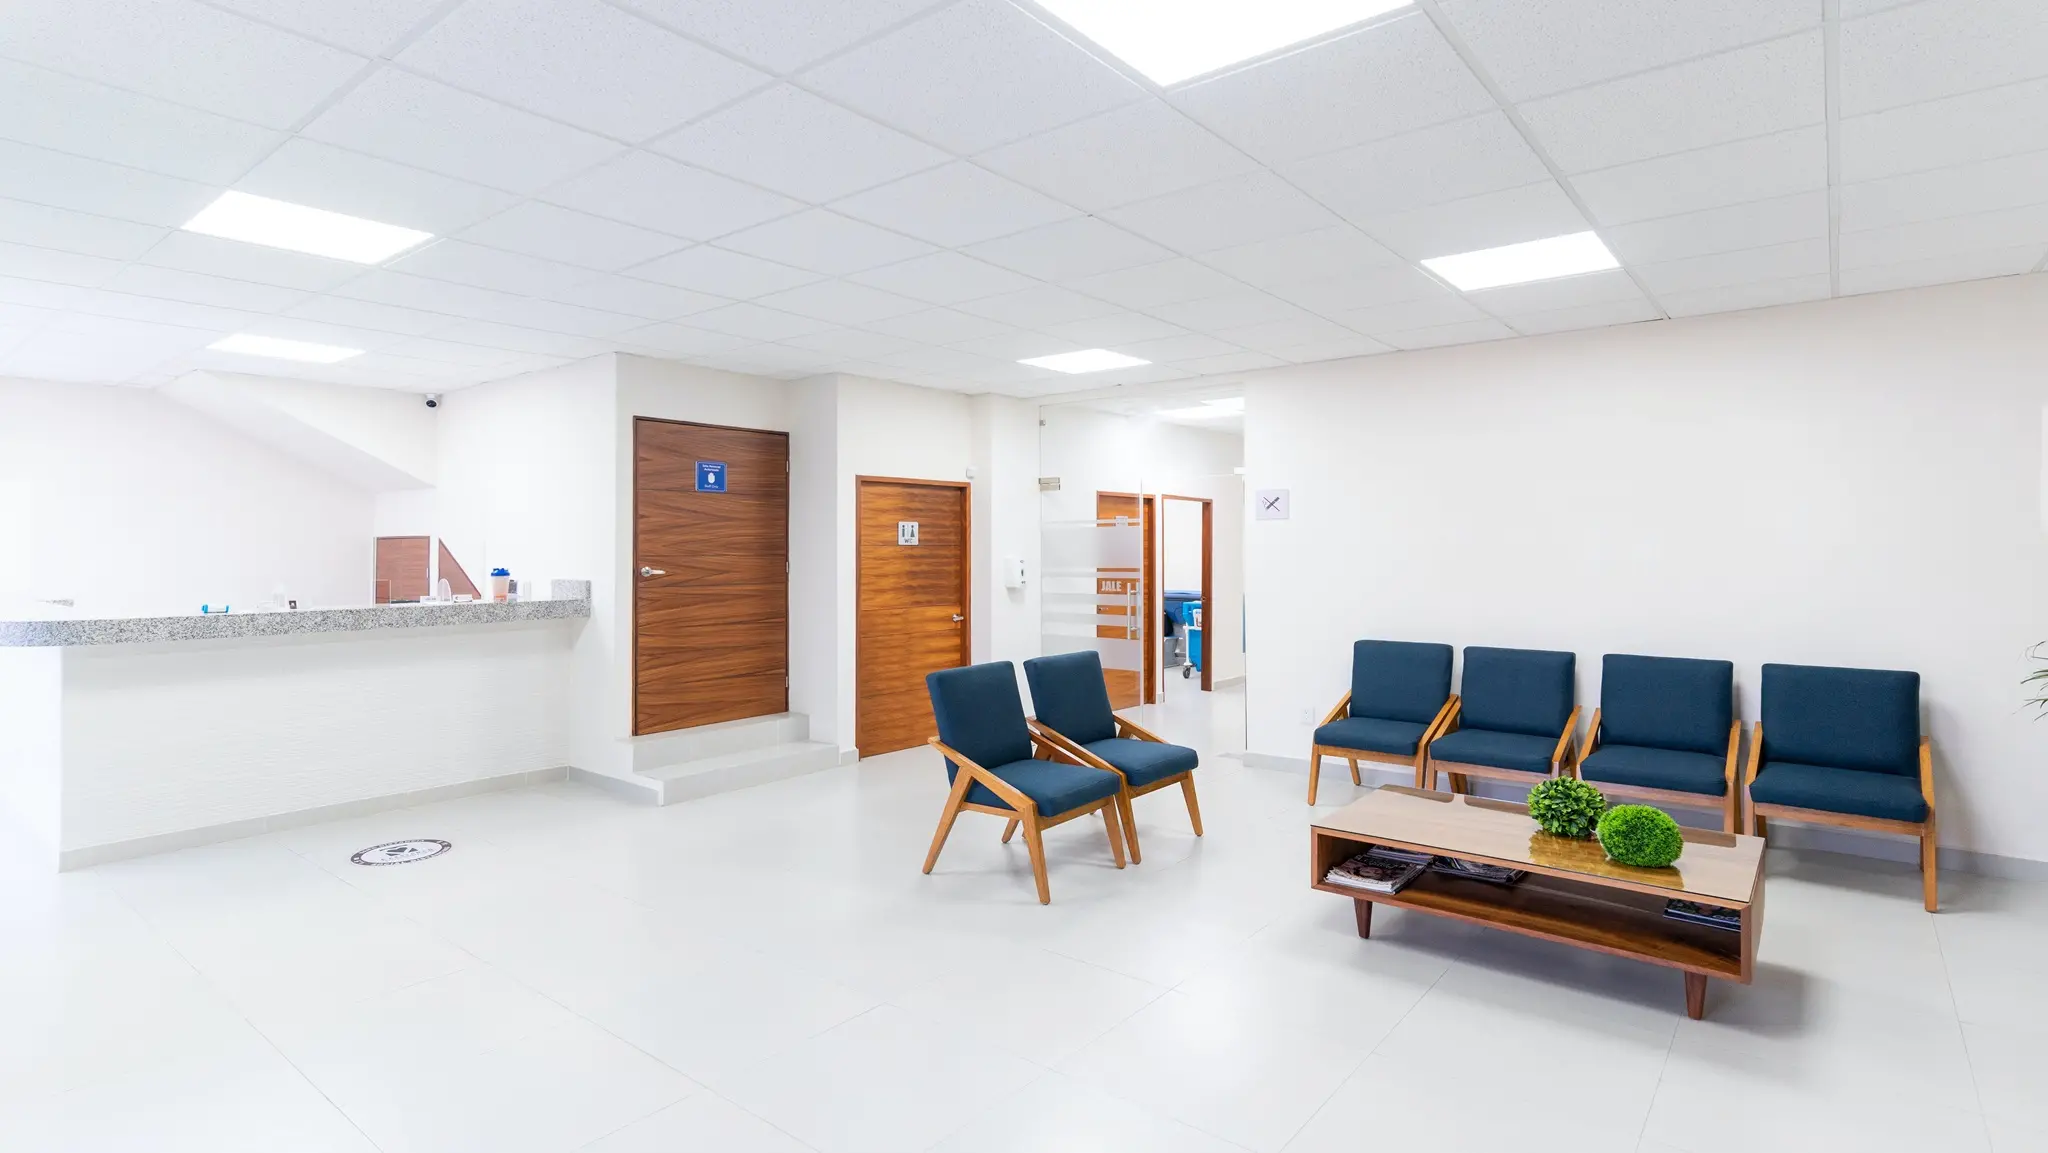 hospitality interior design for healthcare waiting room